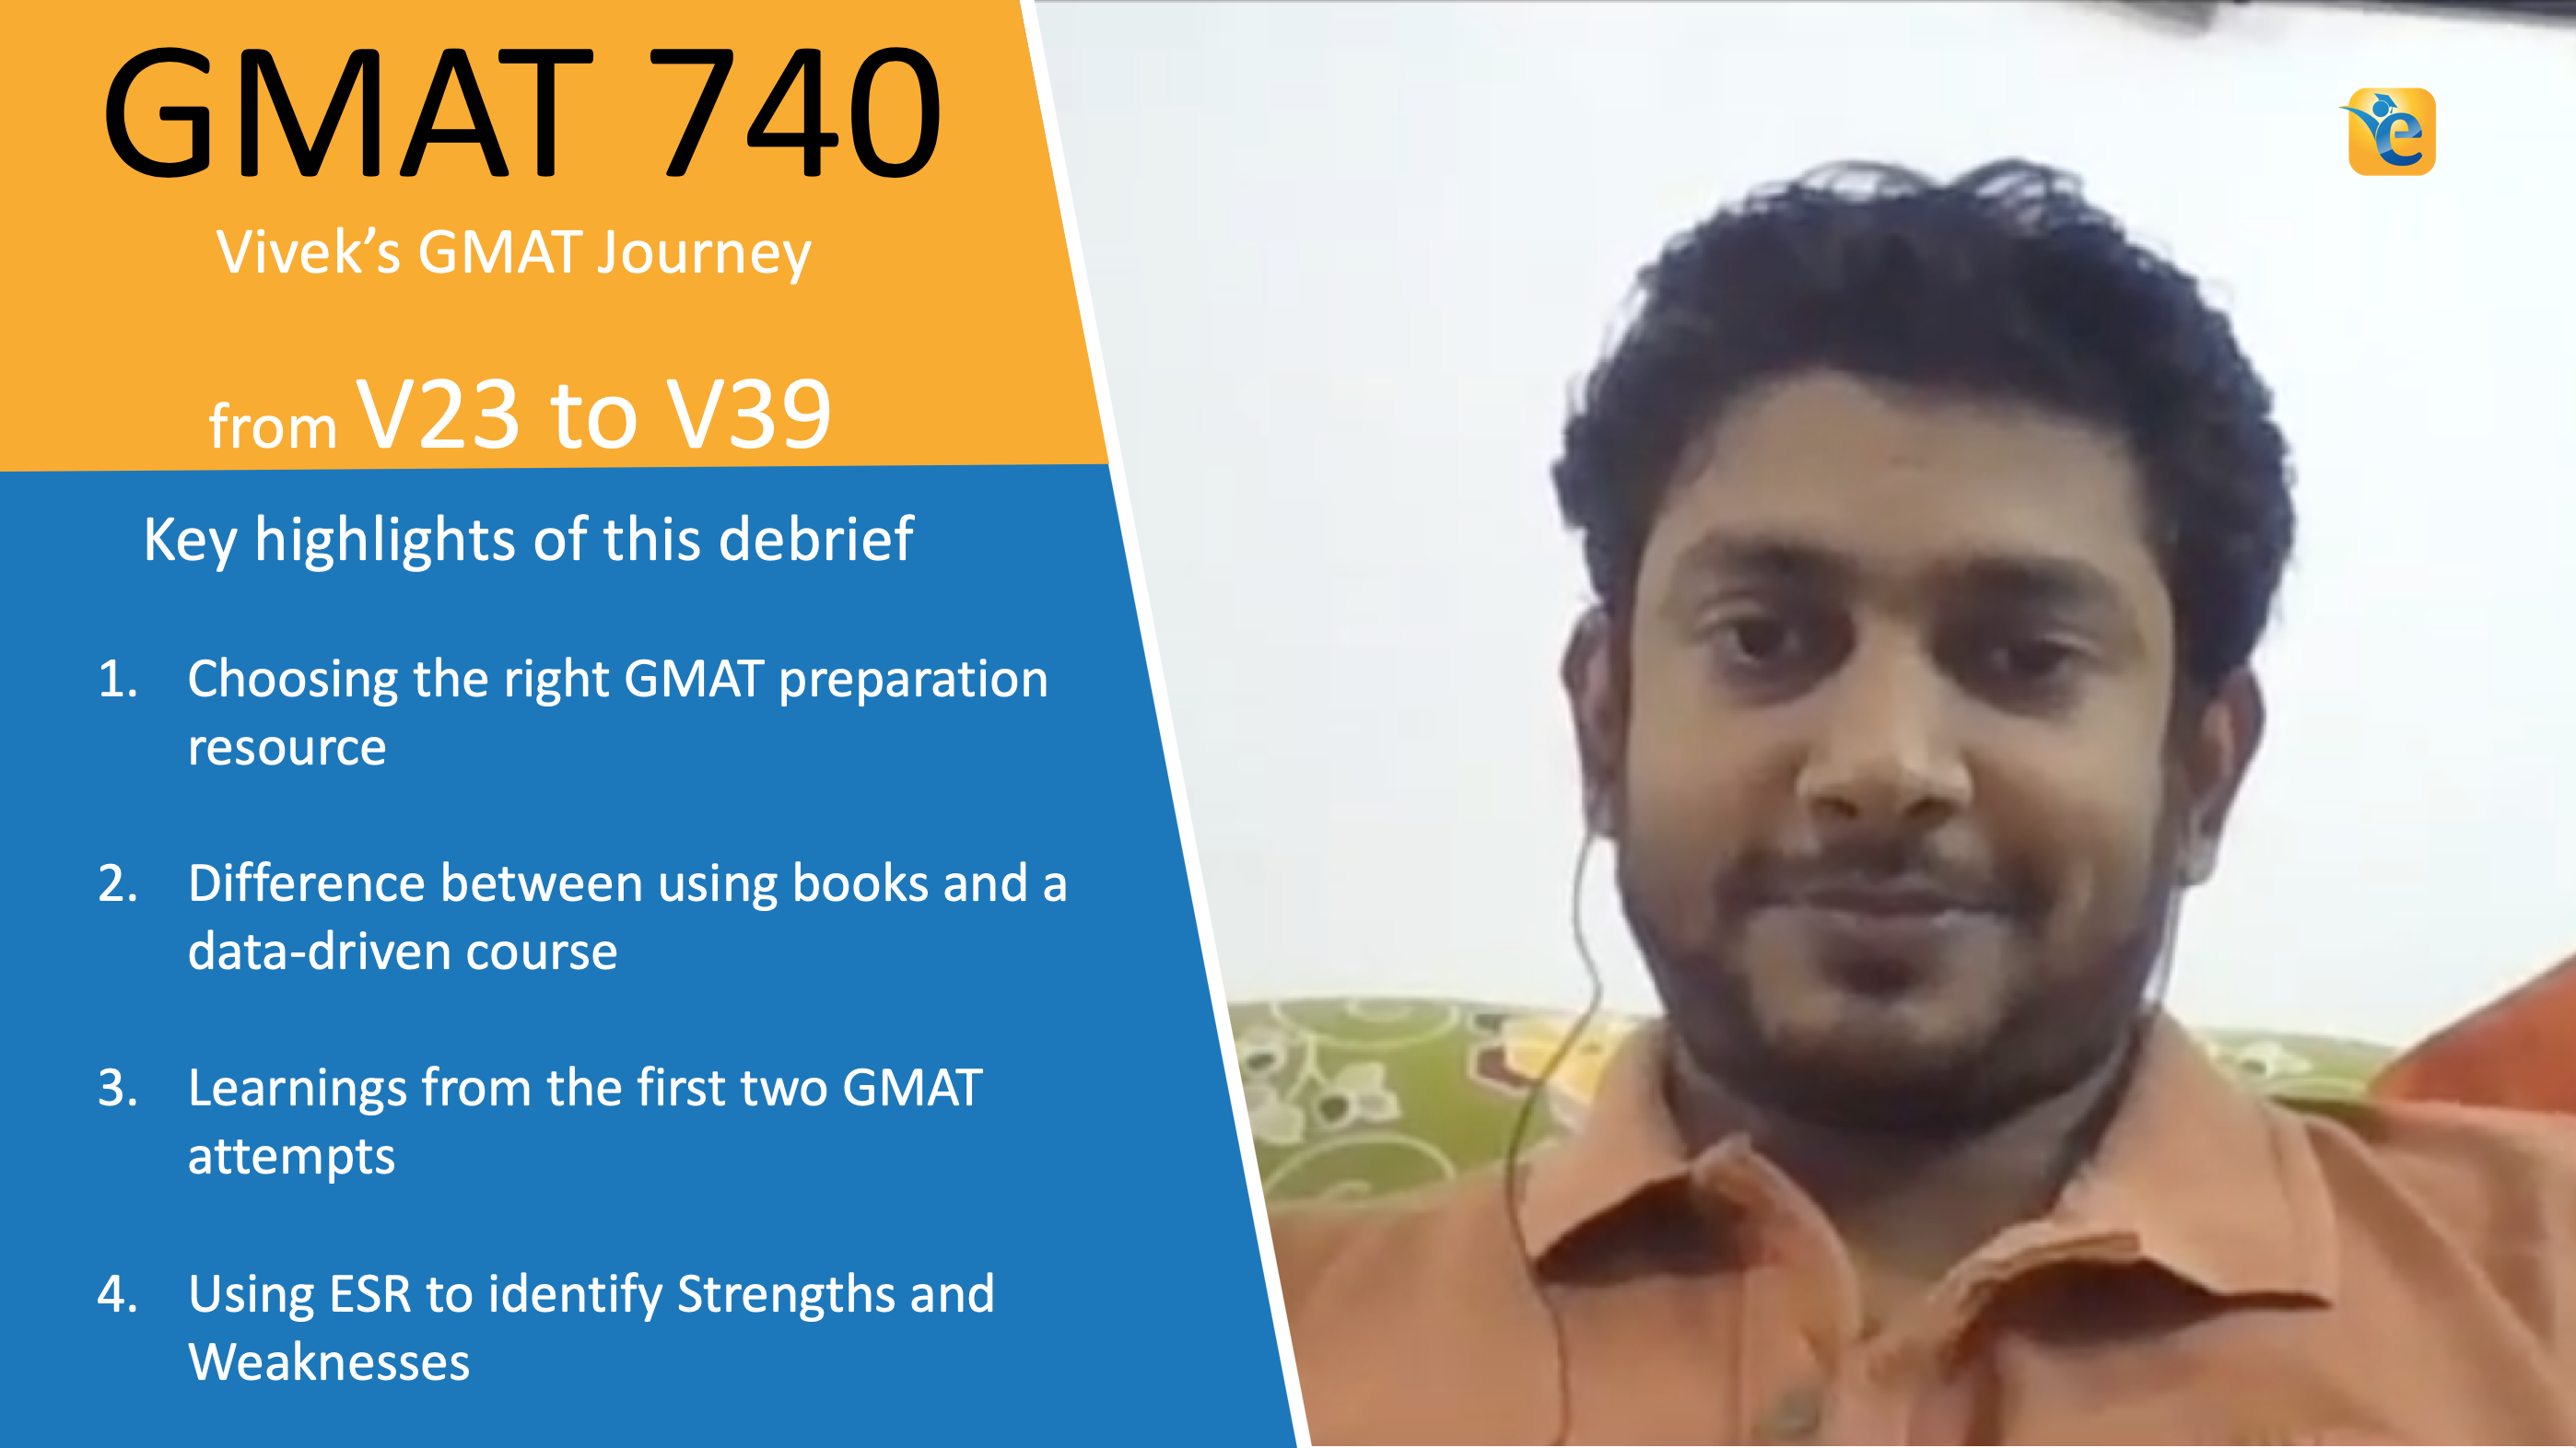 Here’s how Vivek improved from a V23 to V39 on the GMAT